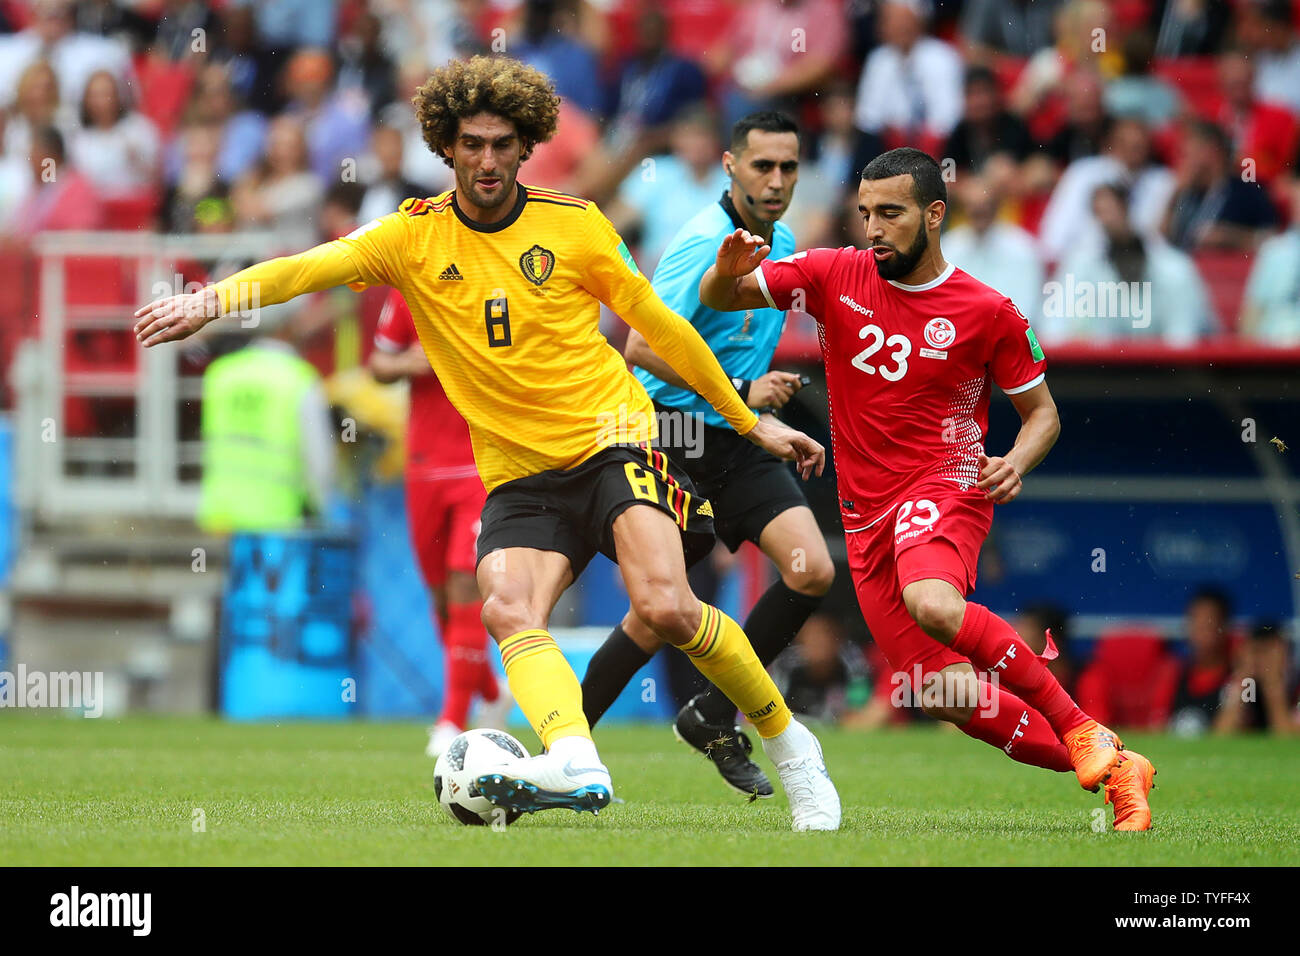 Marouane Fellaini of Belgium (L) is challenged by Naim Sliti of Tunisia during the 2018 FIFA World Cup Group G match at the Spartak Stadium in Moscow, Russia on June 23, 2018. Belgium defeated Tunisia 5-2.     Photo by Chris Brunskill/UPI Stock Photo